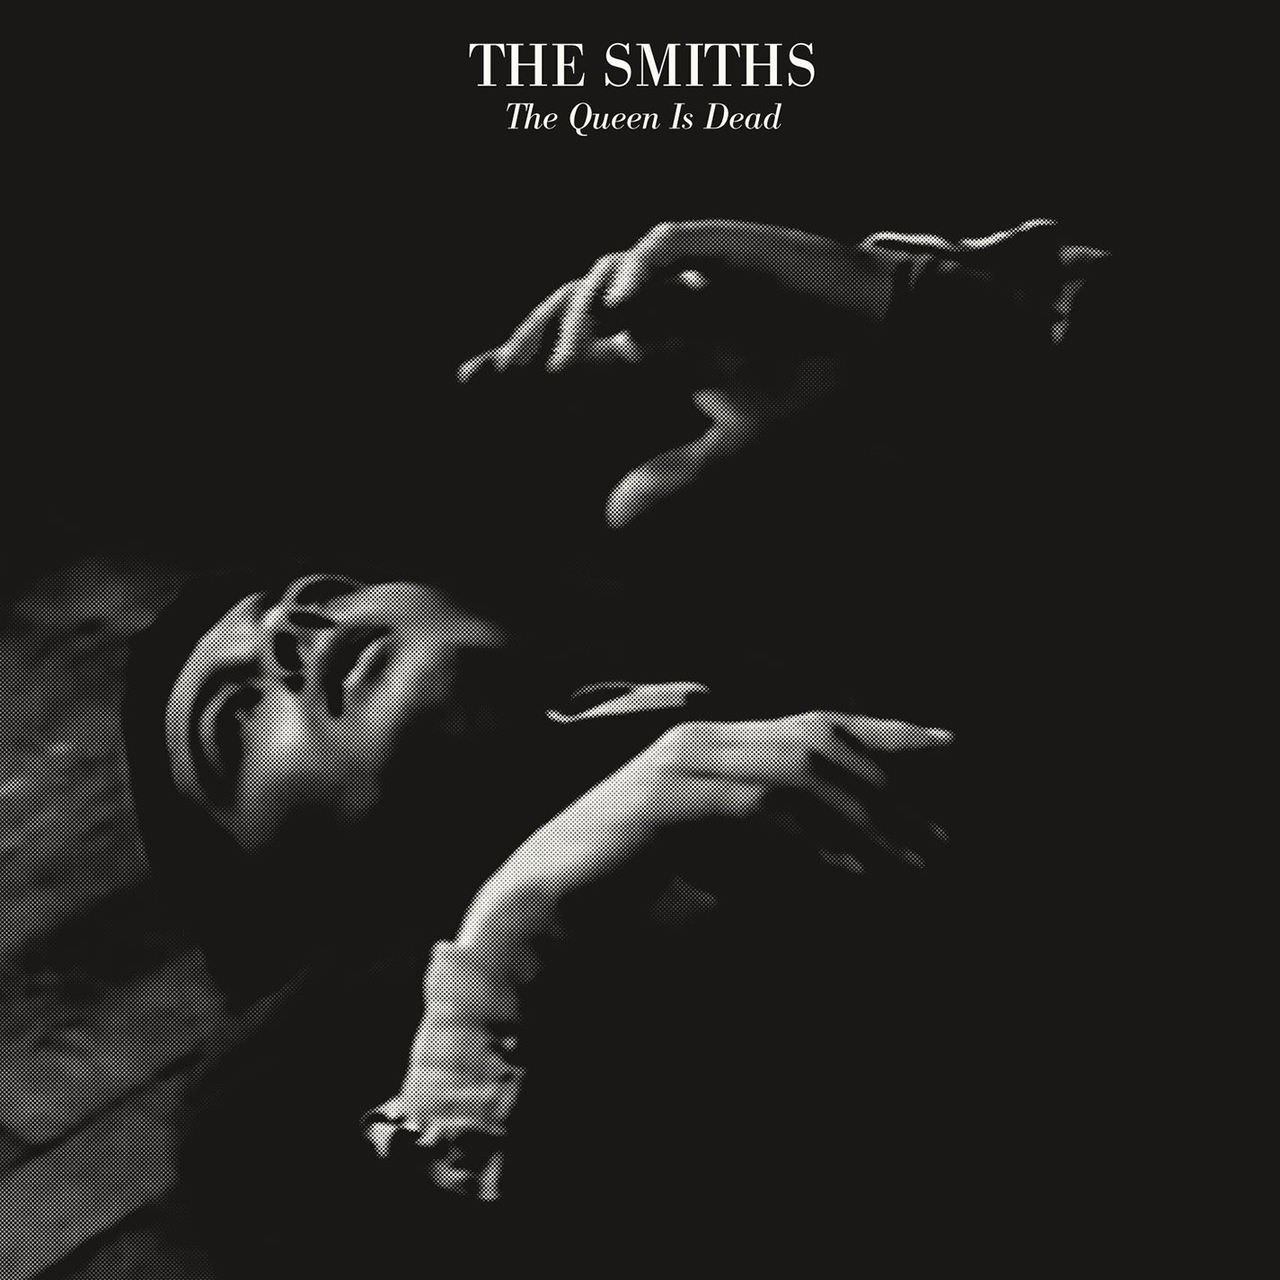 The Smiths - The Queen Is Dead (1986/2017) [Qobuz FLAC 24bit/96kHz]